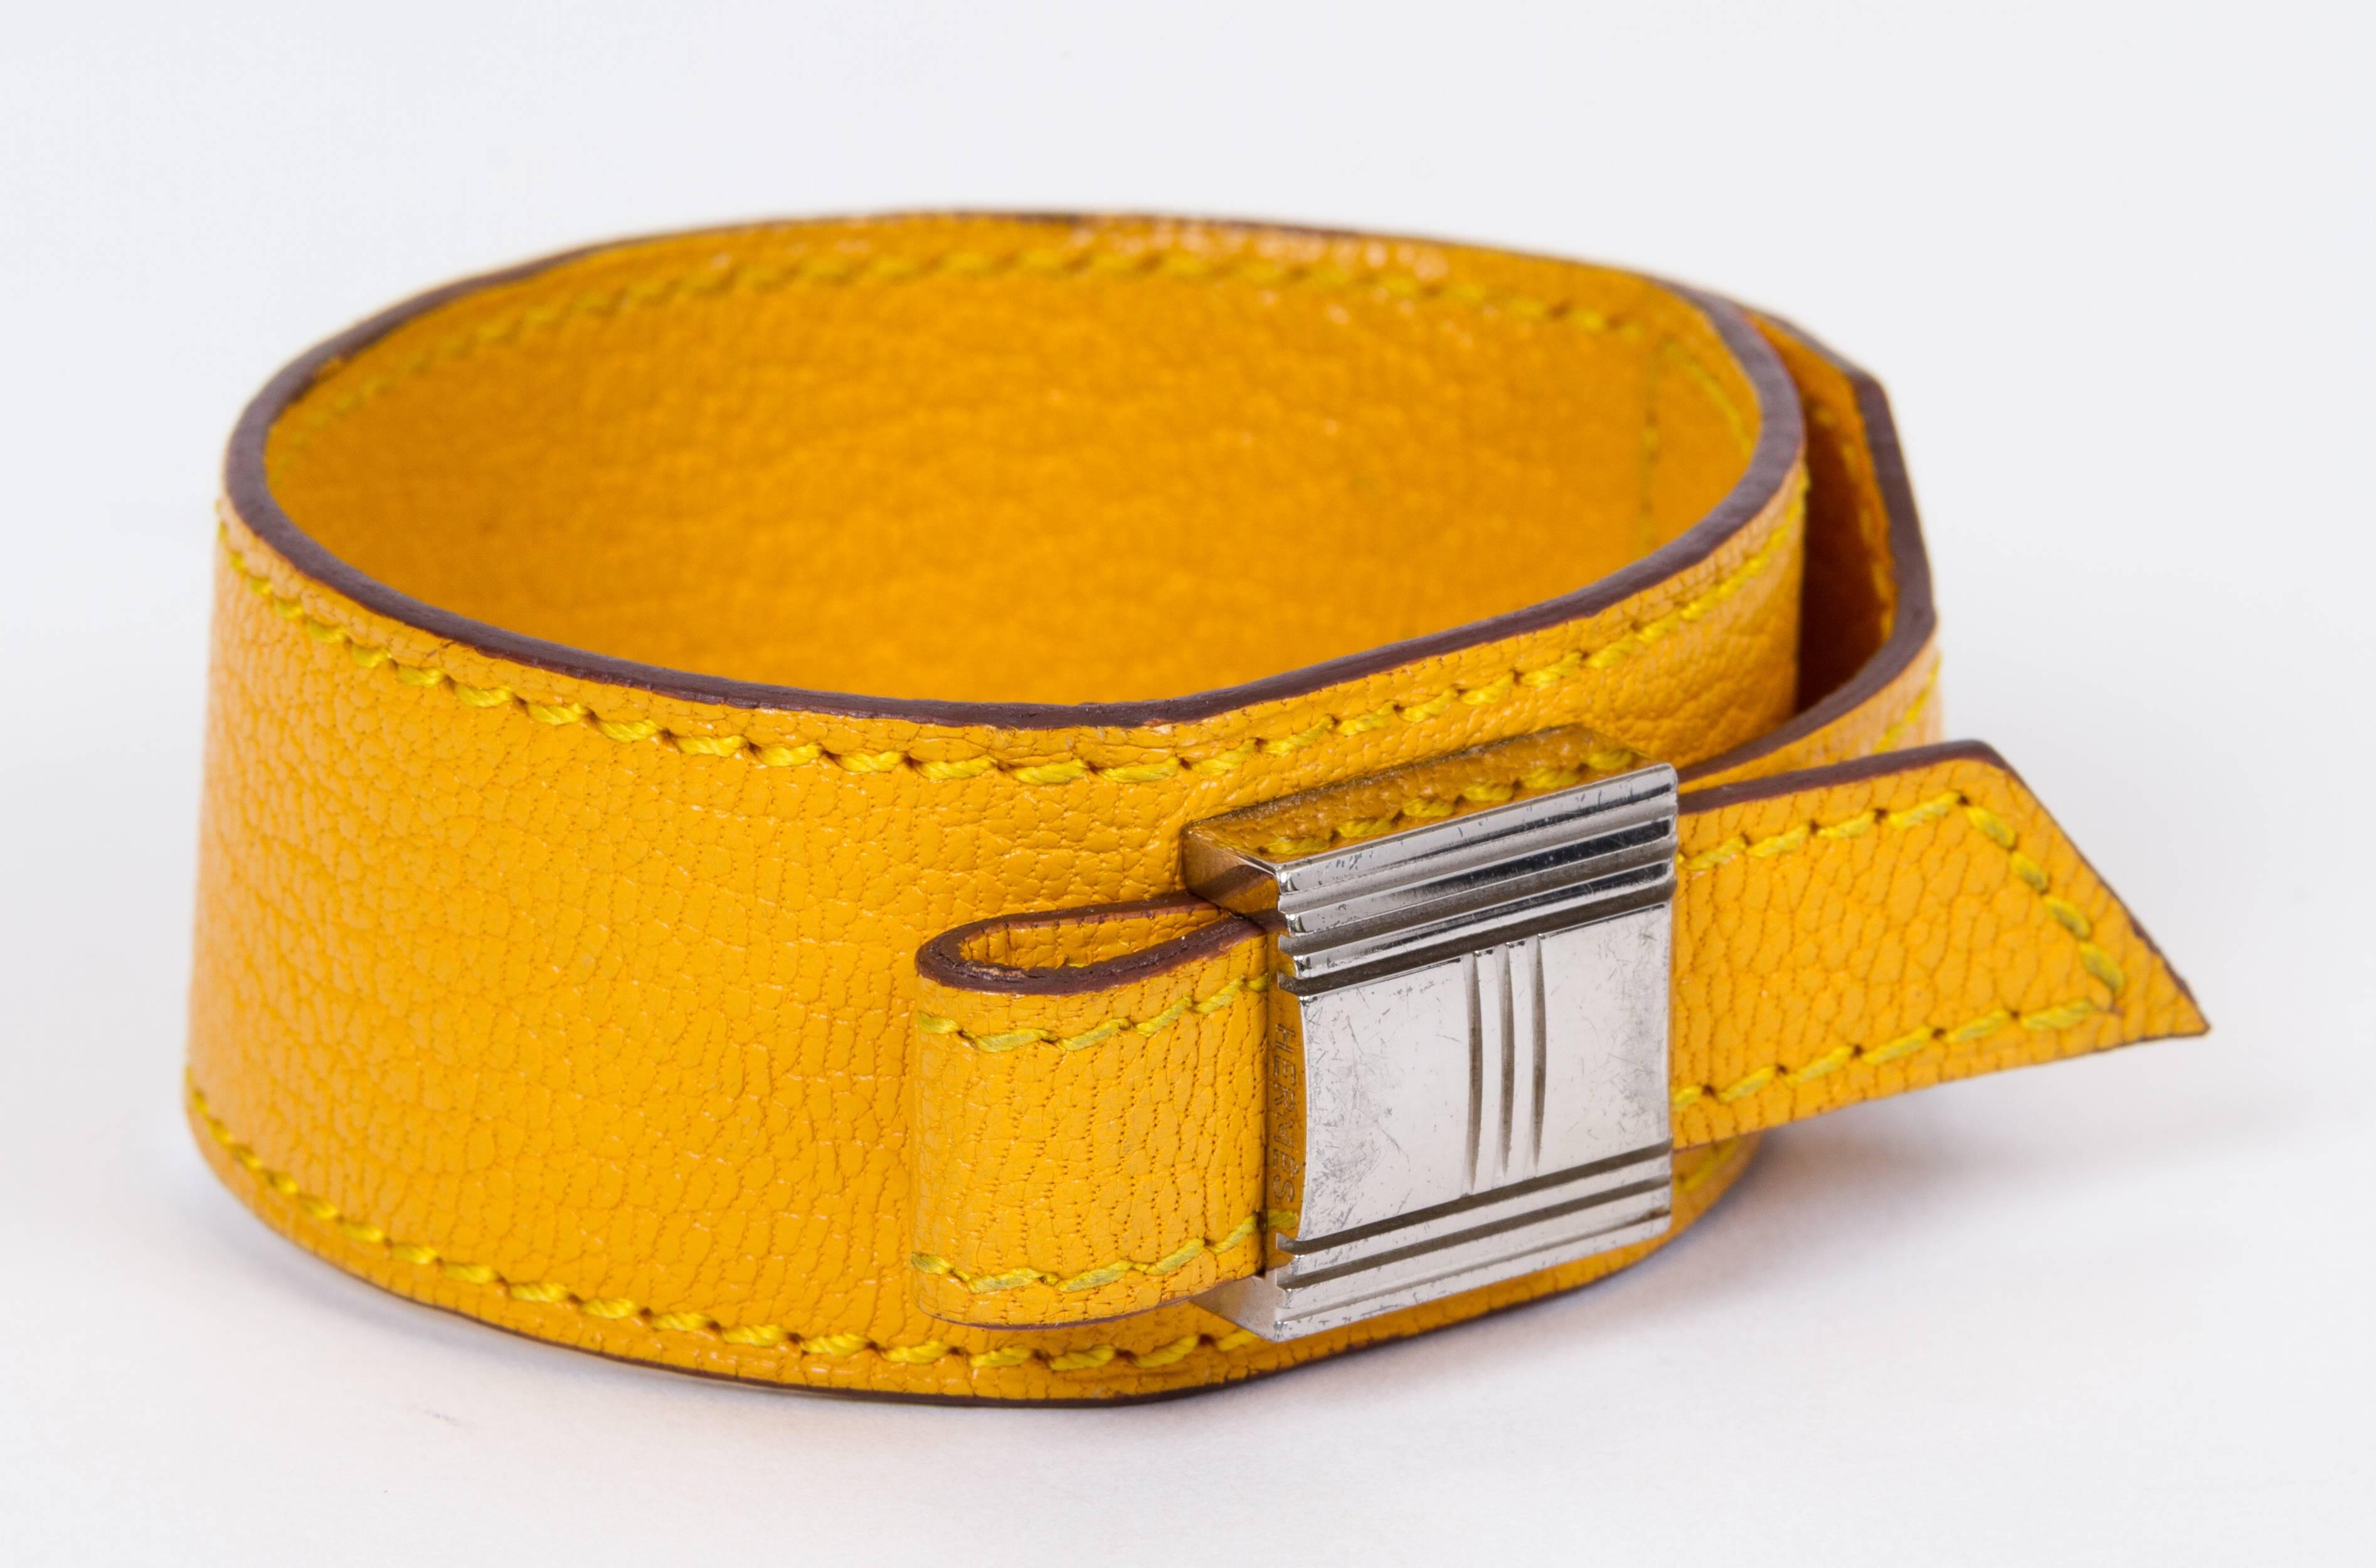 Vintage Hermès yellow leather bracelet palladium hardware slide. Fits any size. Gold hardware in excellent condition. Date stamp F for 2002. Comes with original box. Minor wear on the interior.